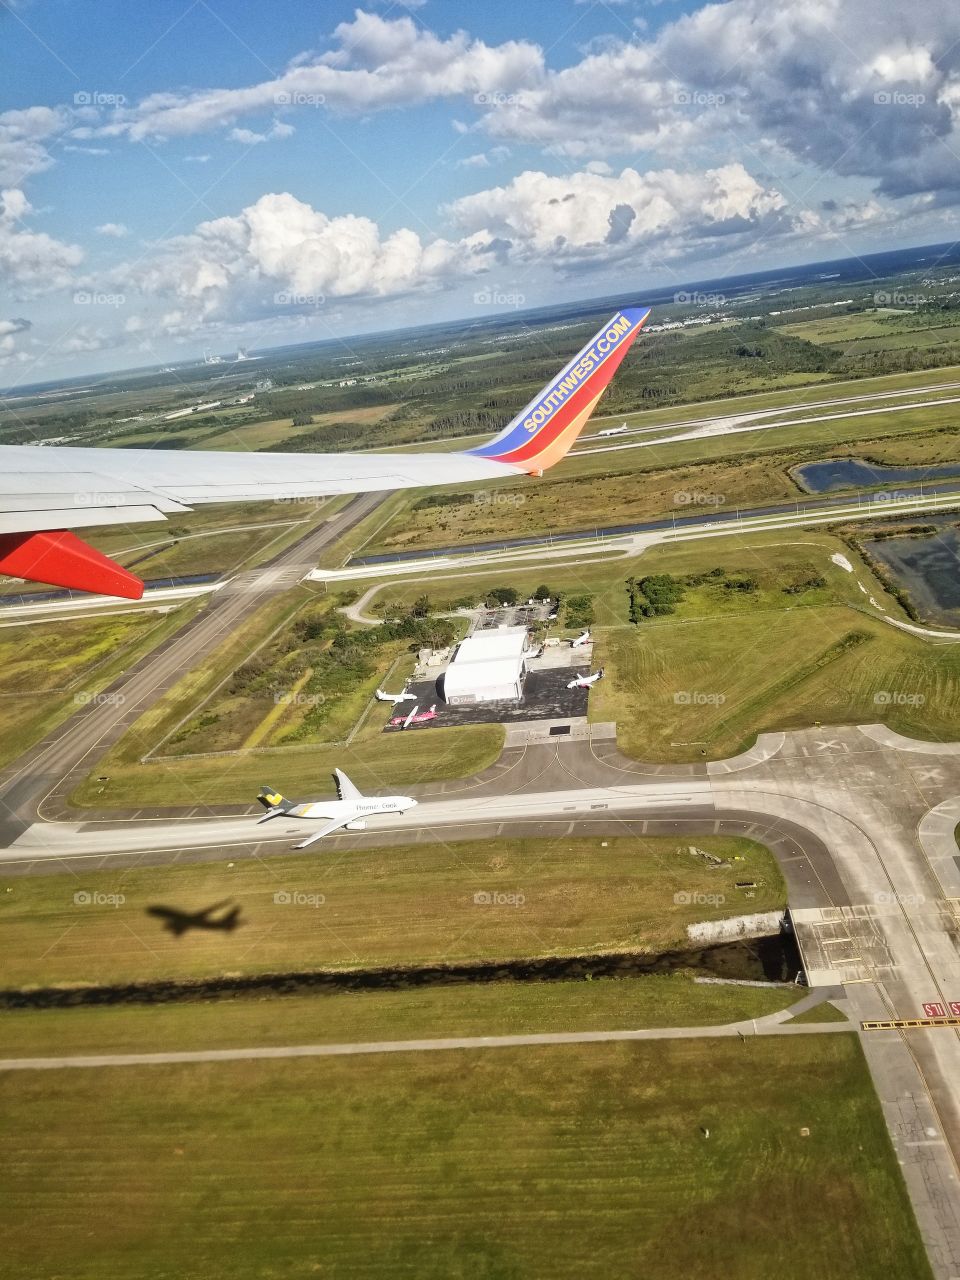 First time seeing my planes Shadow